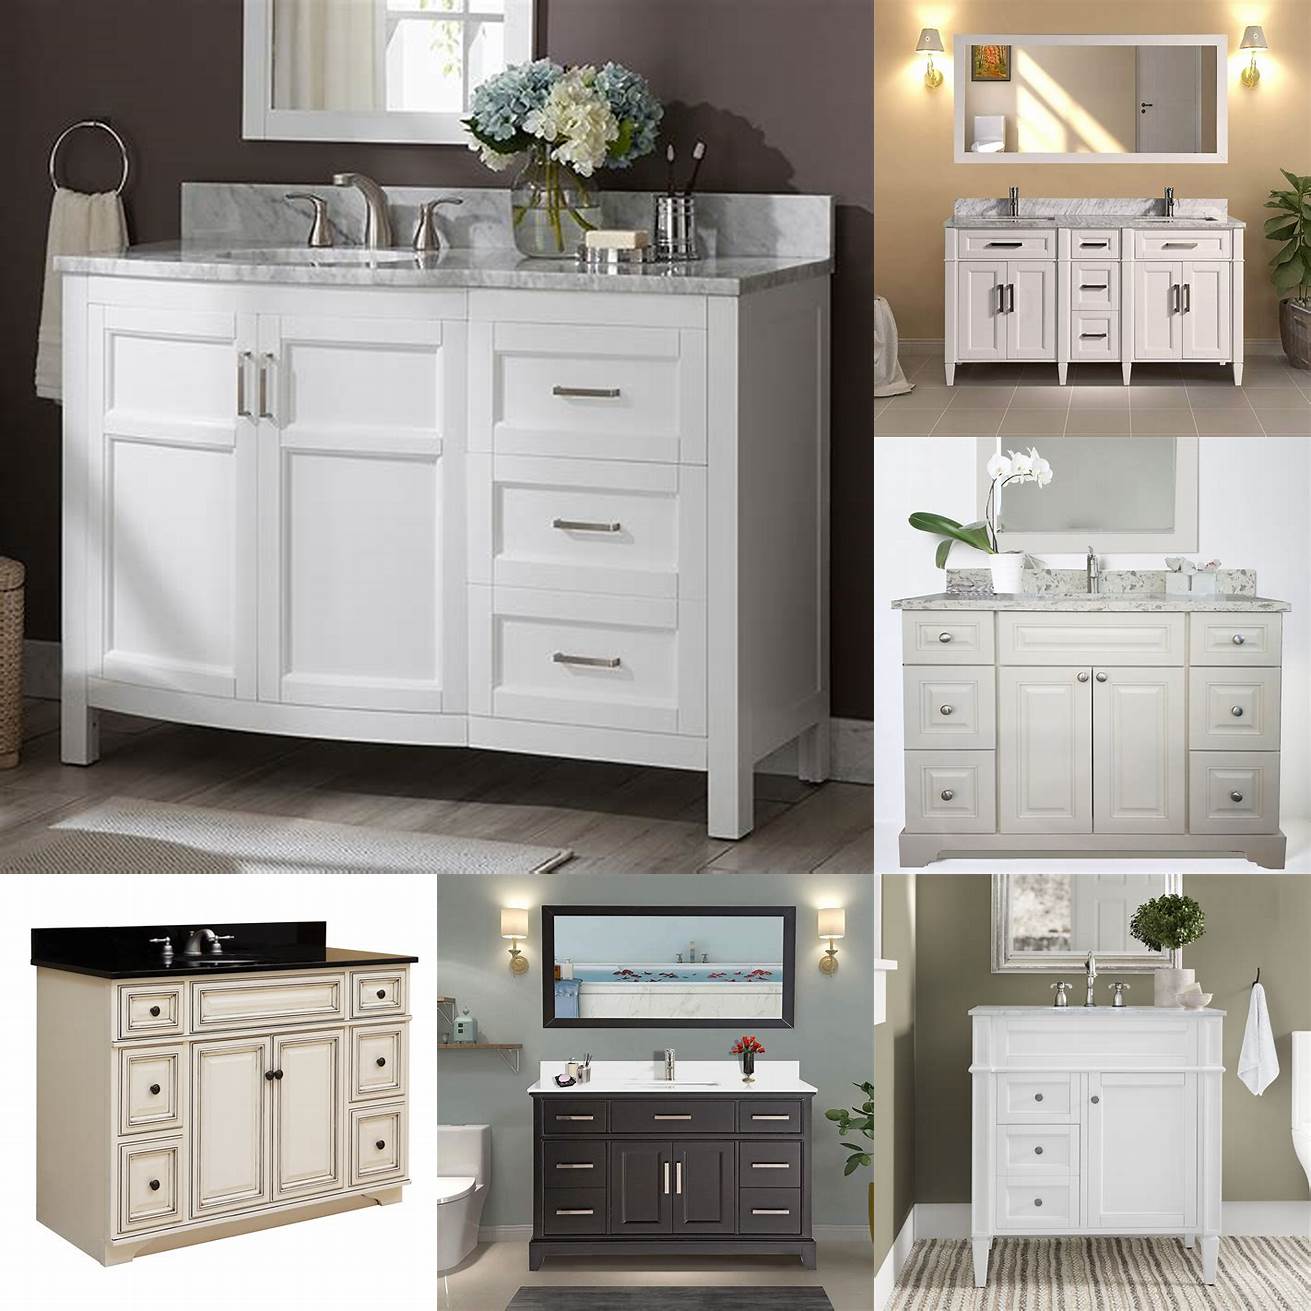 Price Vanity base cabinets can range in price from under 100 to over 1000